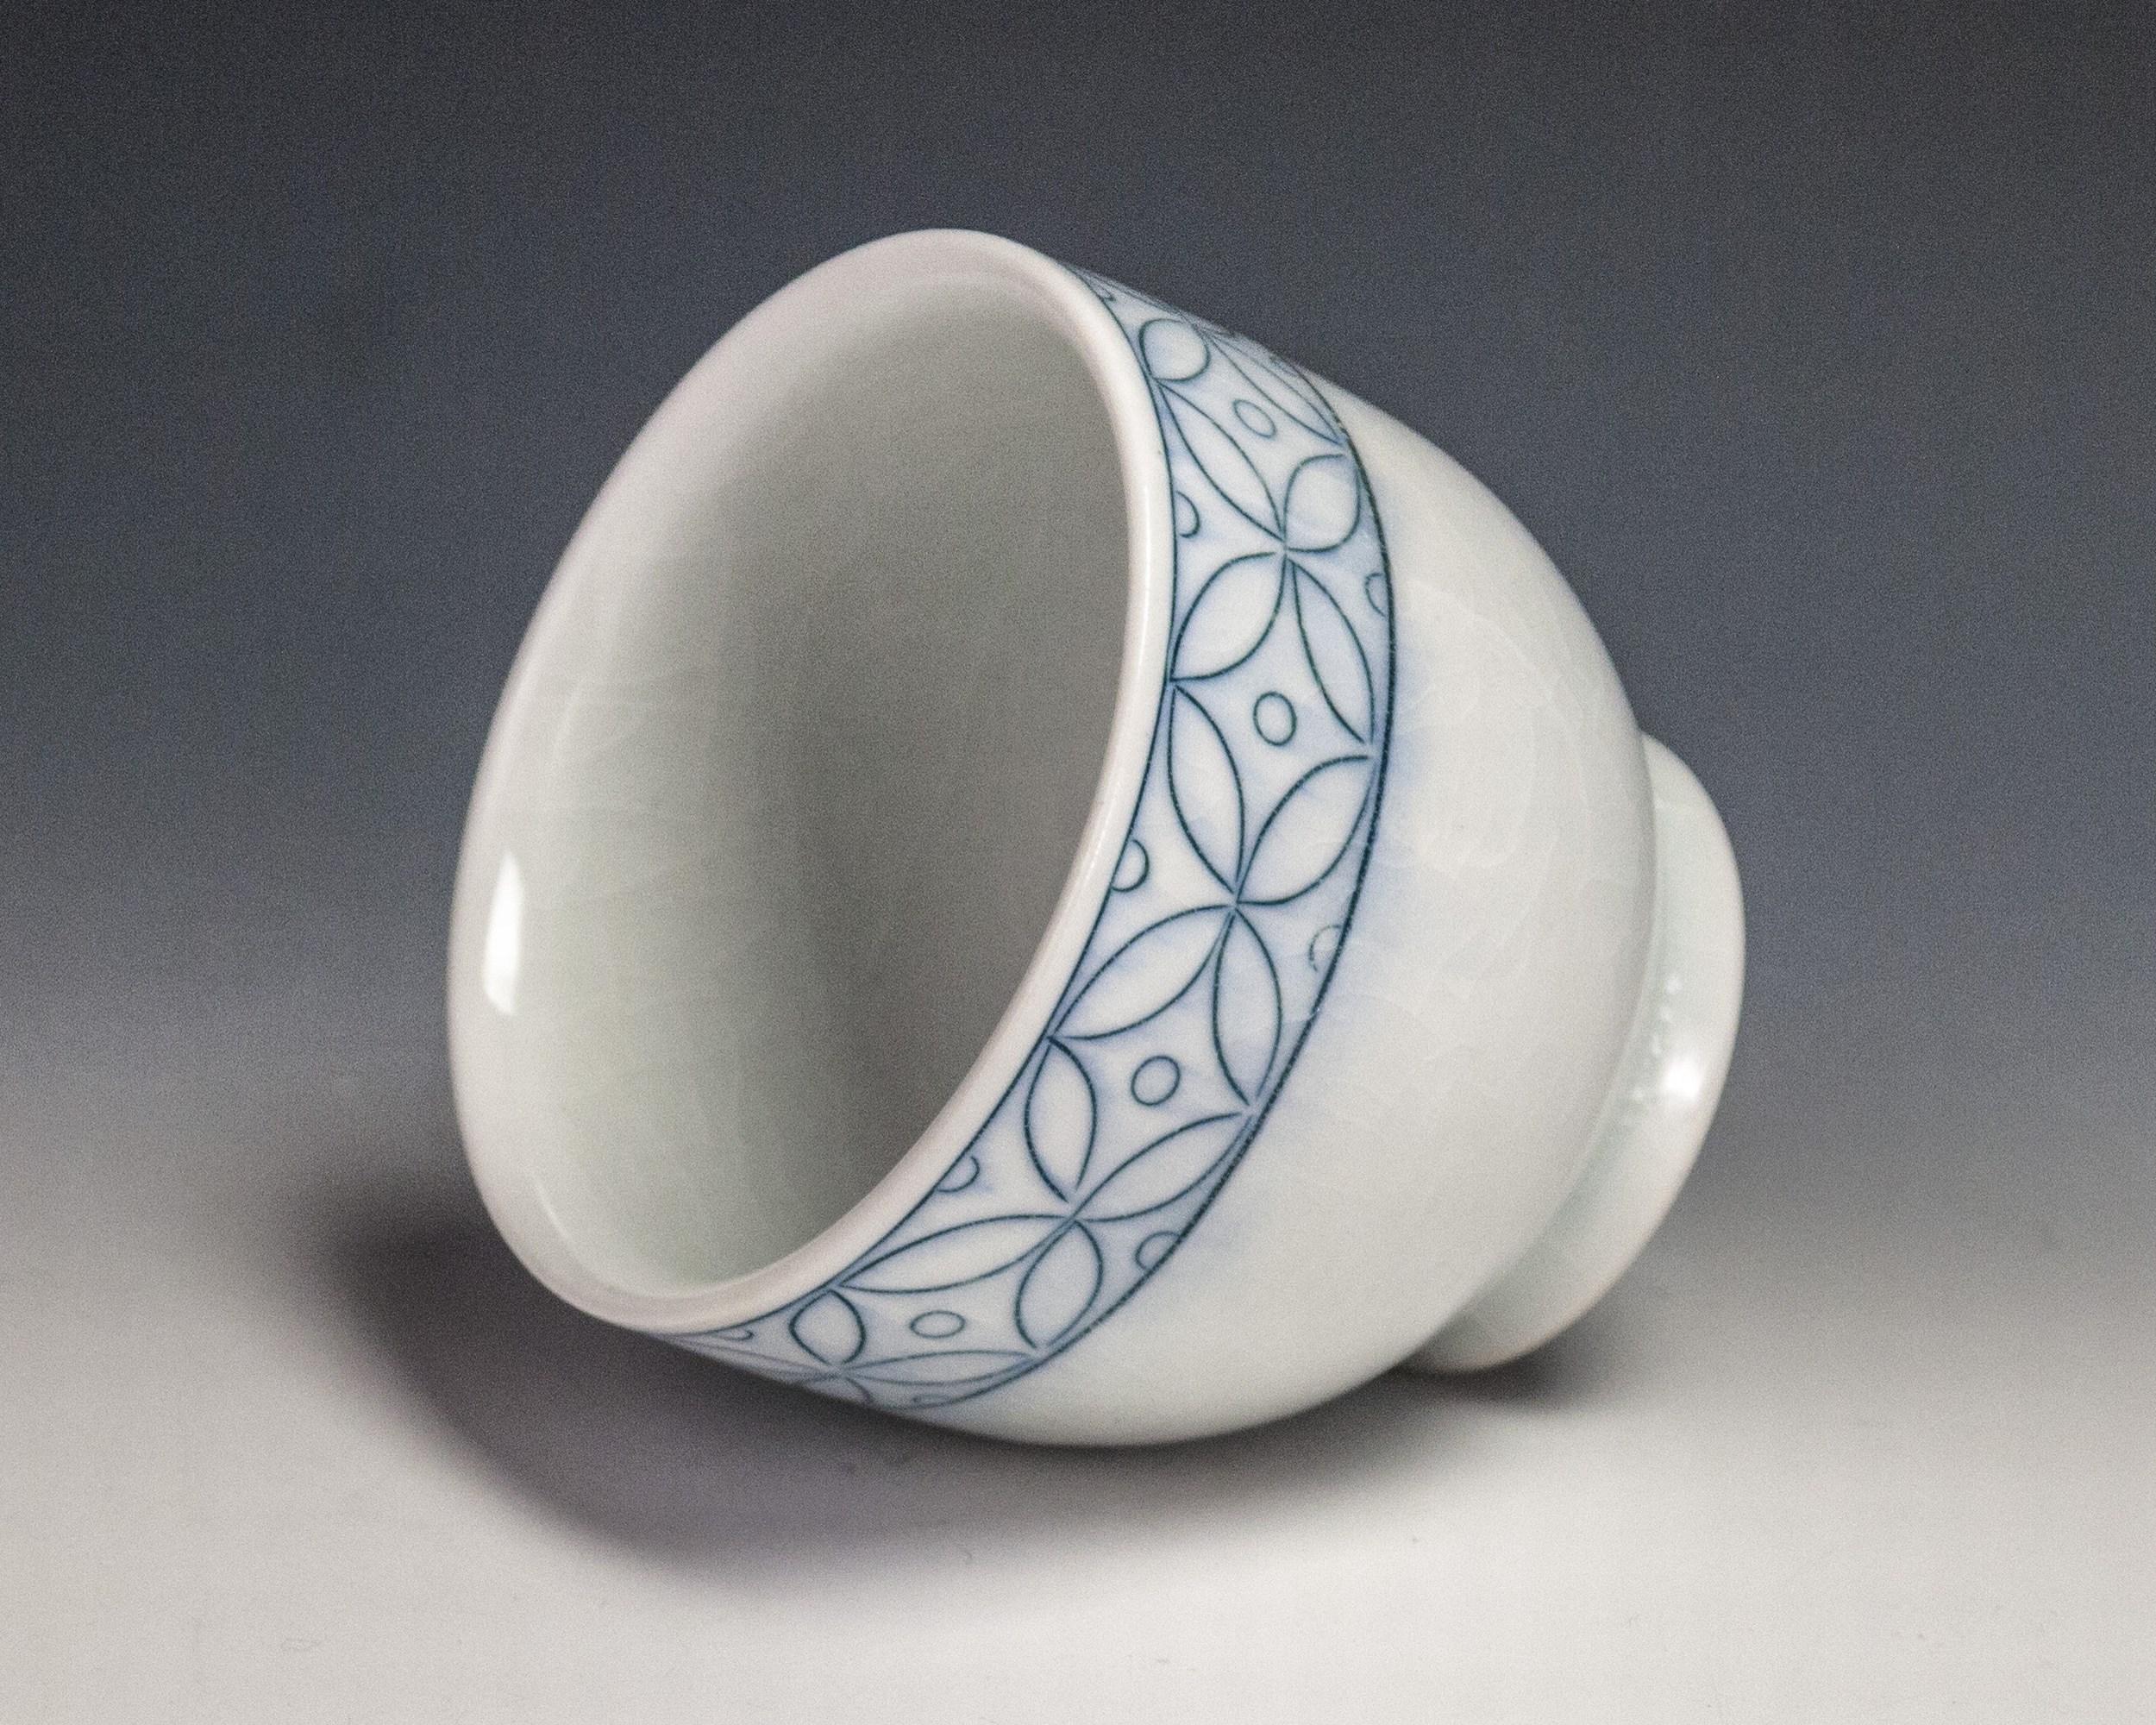 Sgraffito Seed Cup
Materials: Porcelain and Glaze
Date: 2018

Steven Young Lee has been the resident artist director of the Archie Bray Foundation for the Ceramic Arts in Helena, Montana since 2006. In 2004-05, he lectured and taught at numerous